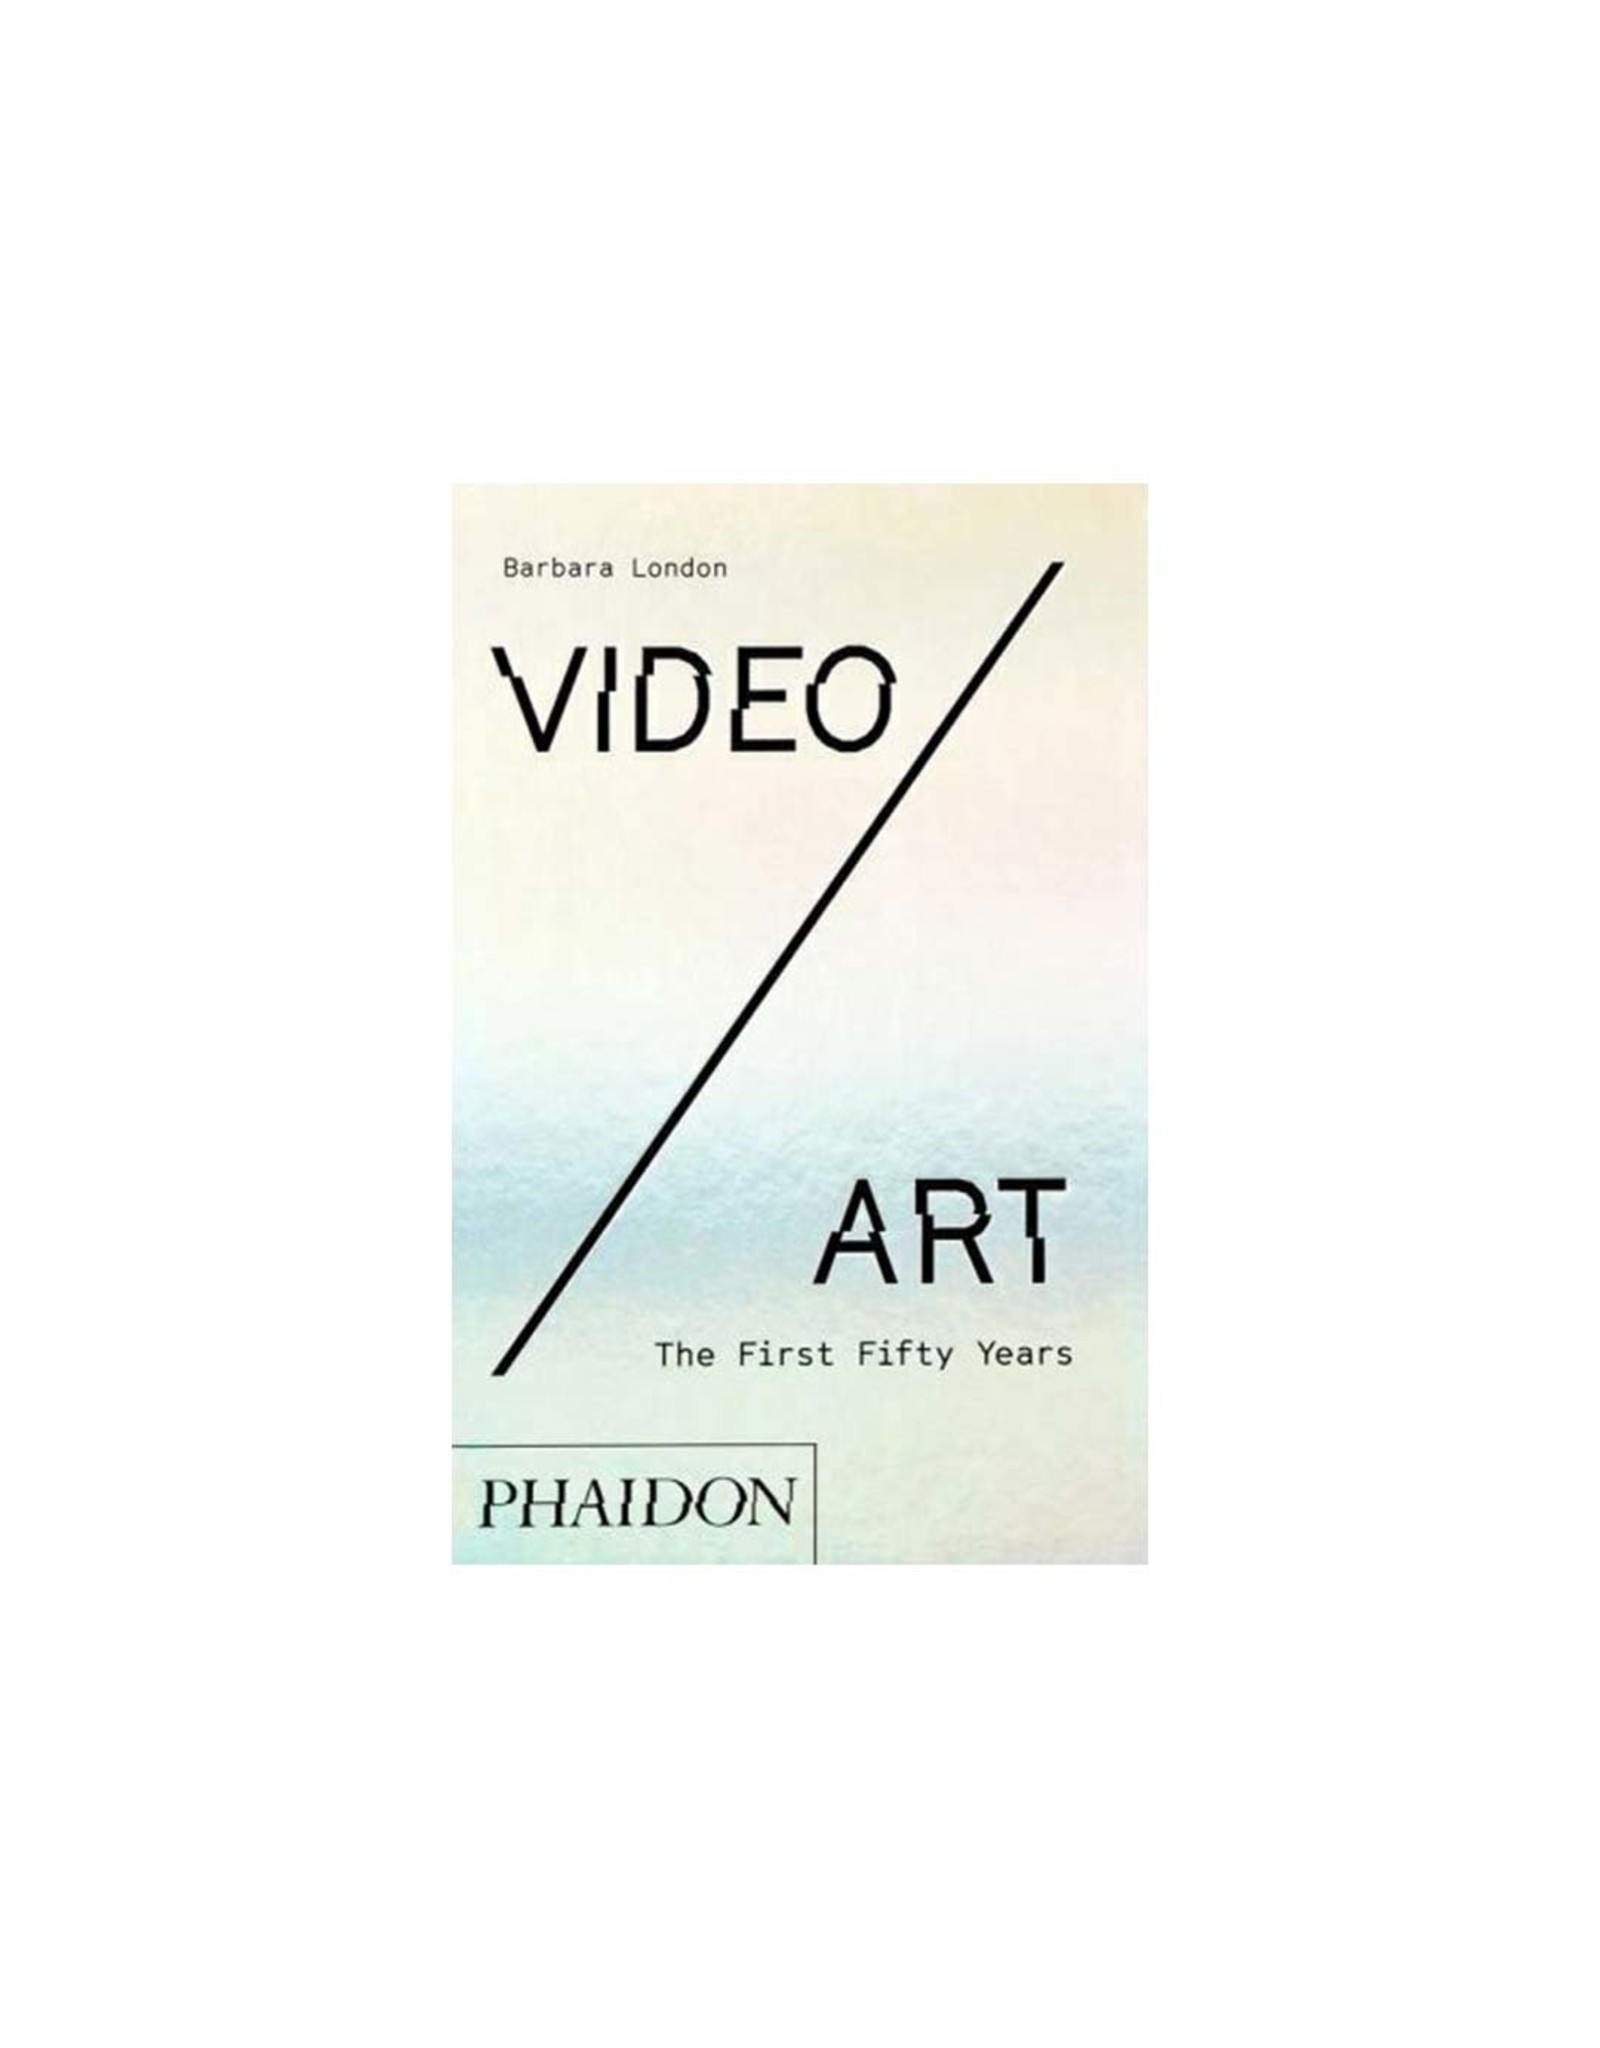 Video / Art The First Fifty Years